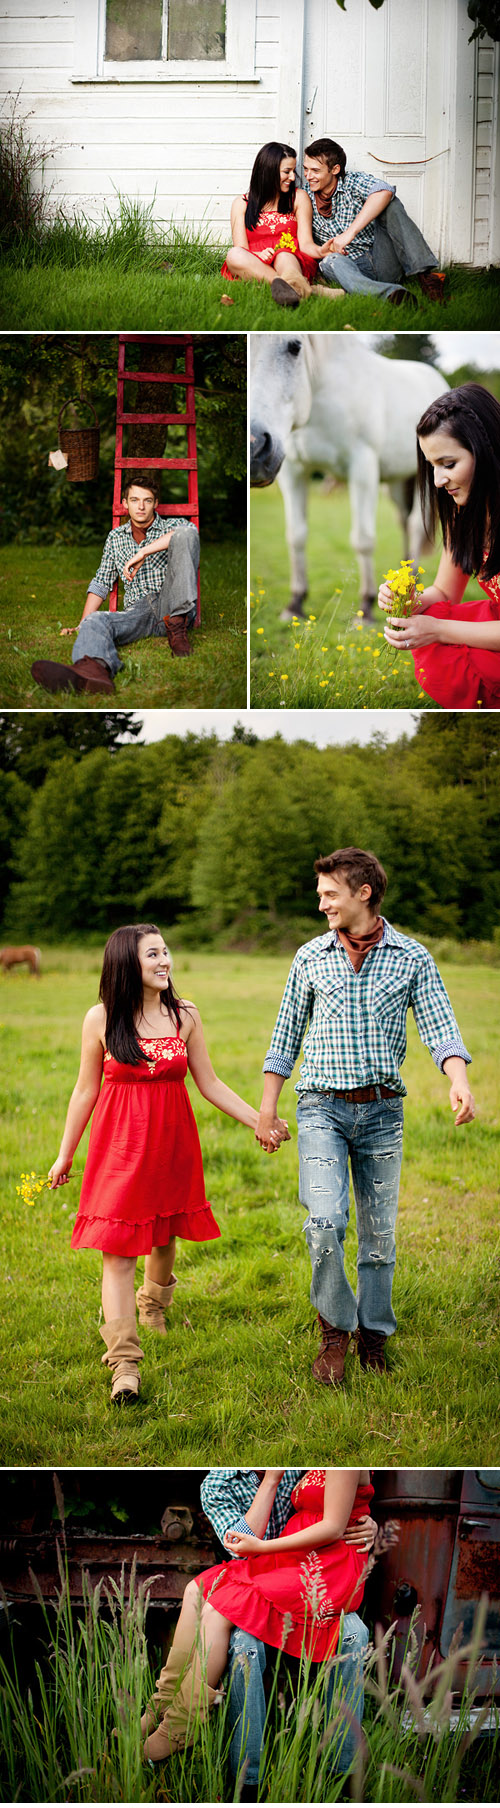 country style engagement photo session from Daniel Usenko